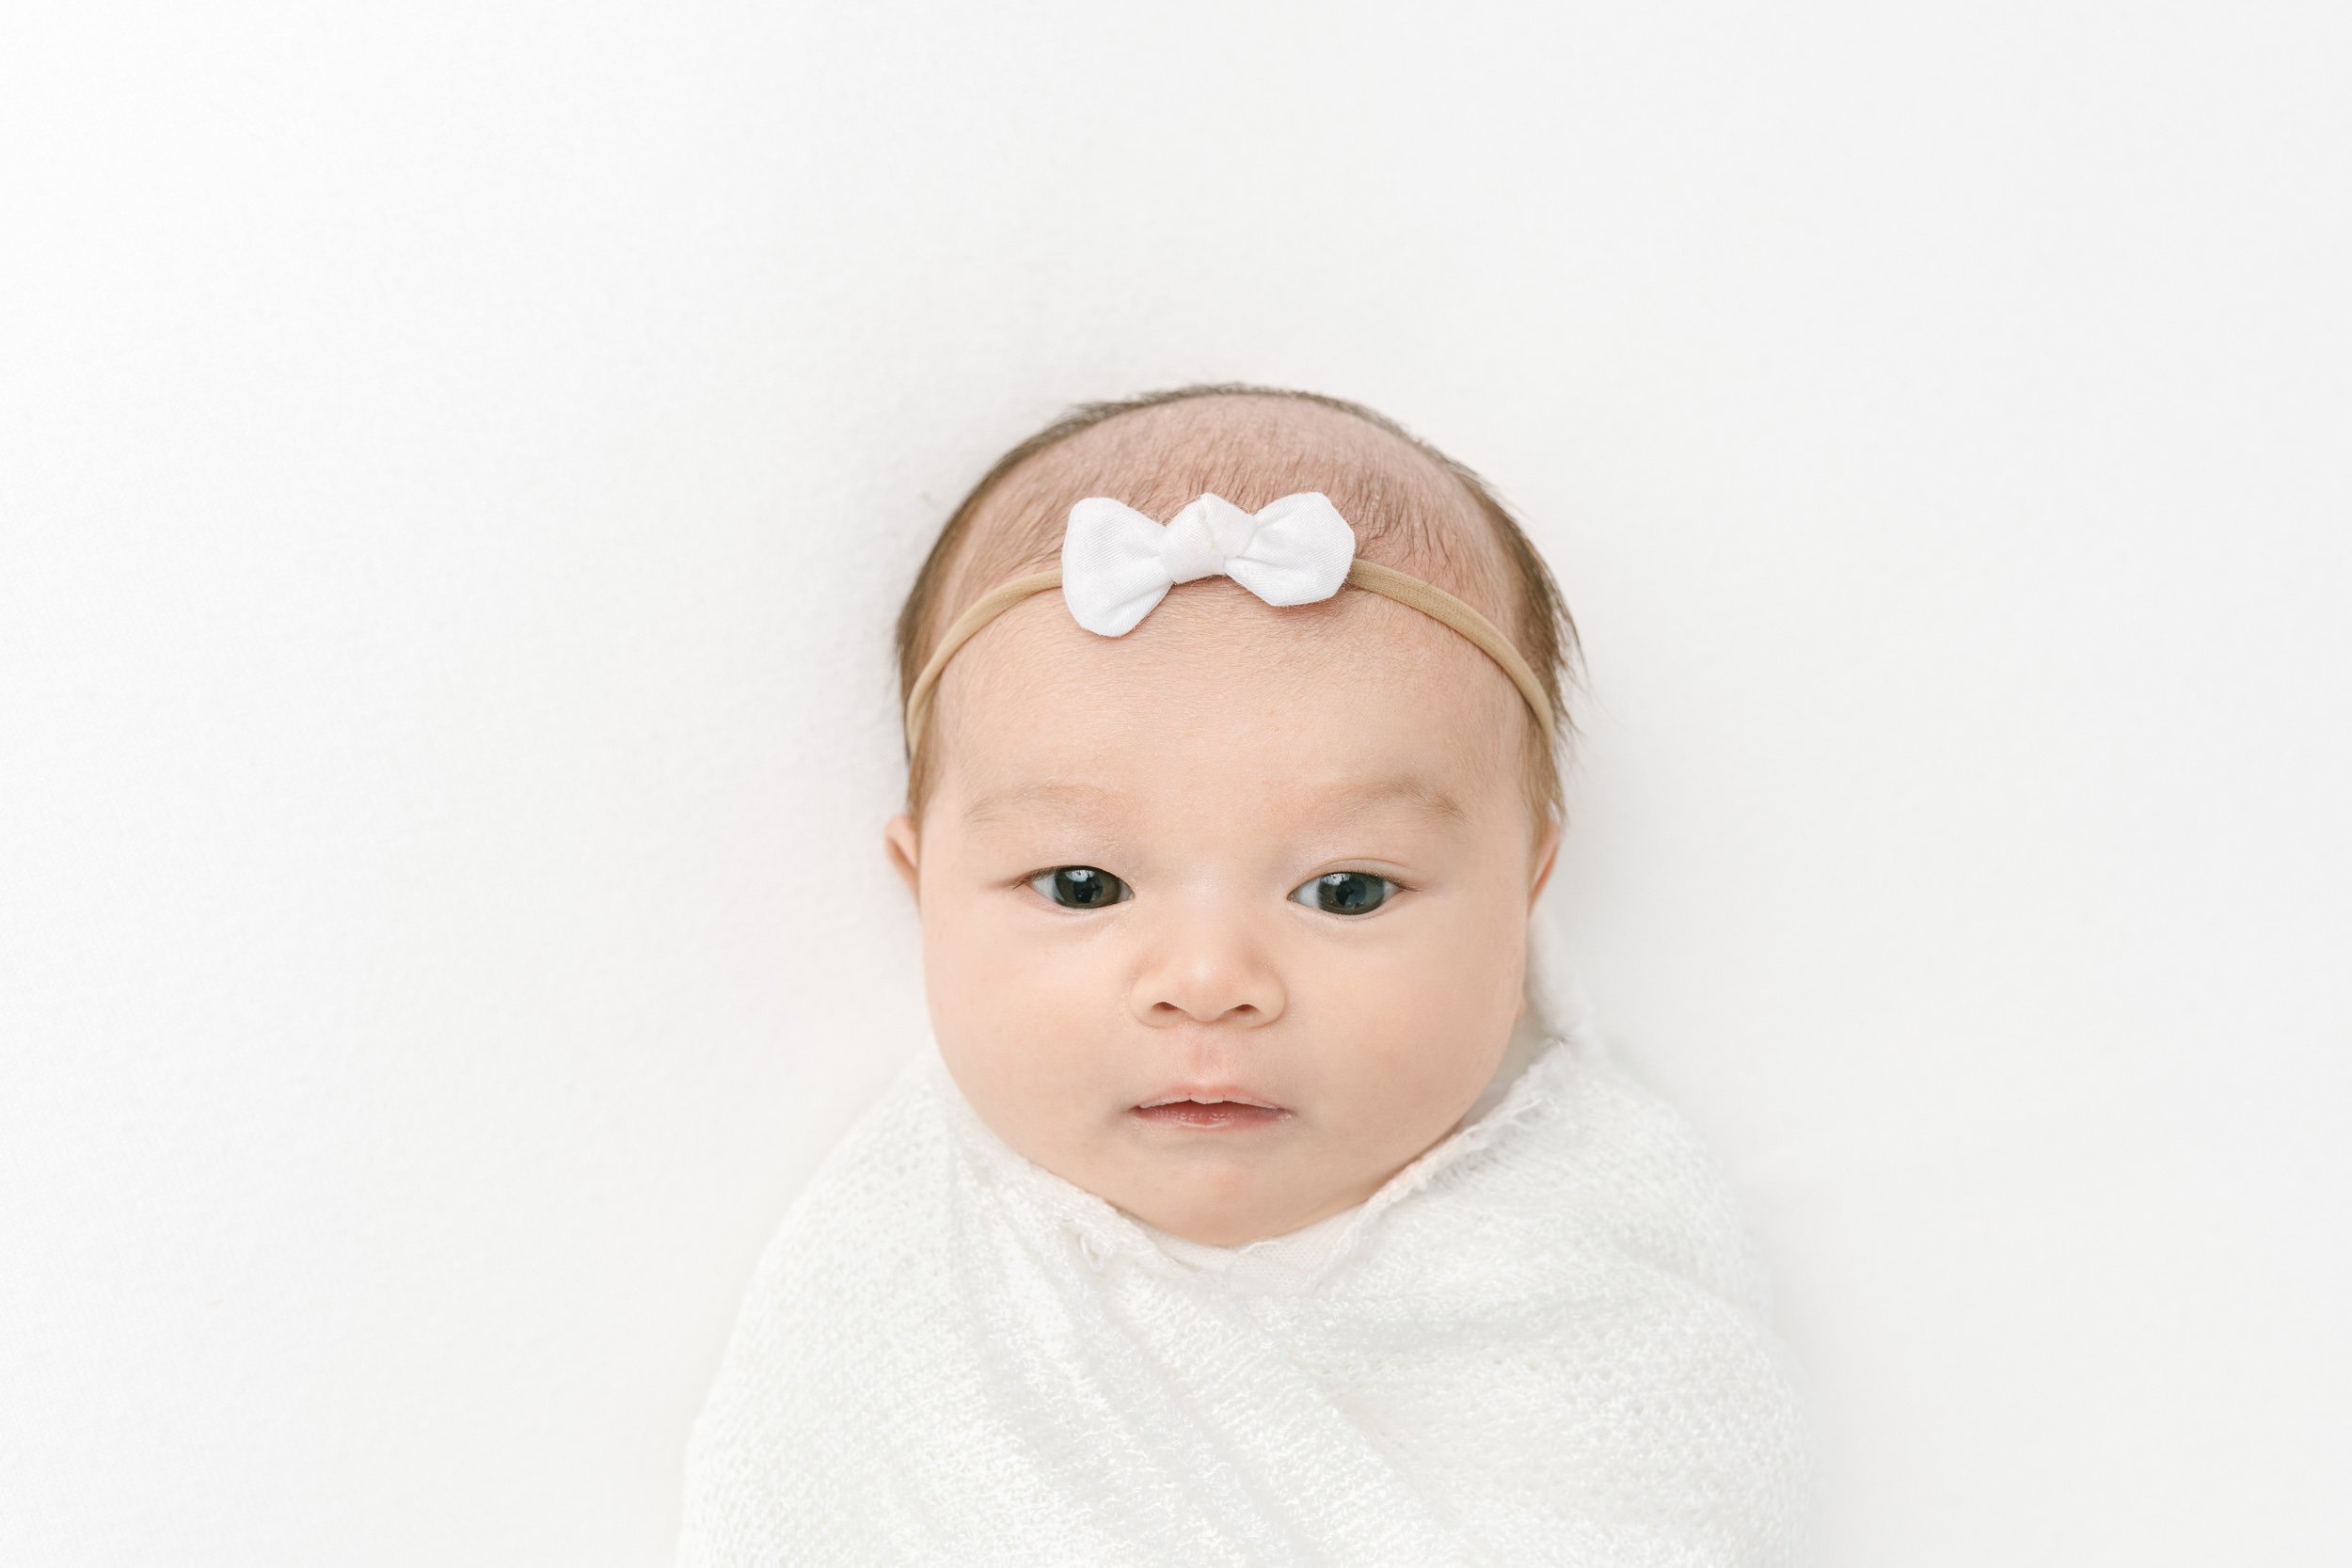  Baby girl with eyes wide open wearing a white bow captured by NJ newborn photographer Nicole Hawkins Photography. baby with eyes open white bow #NicoleHawkinsPhotography #studionewbornportraits #NJstudiophotographer #NJnewborns #NicoleHawkinsNewborn